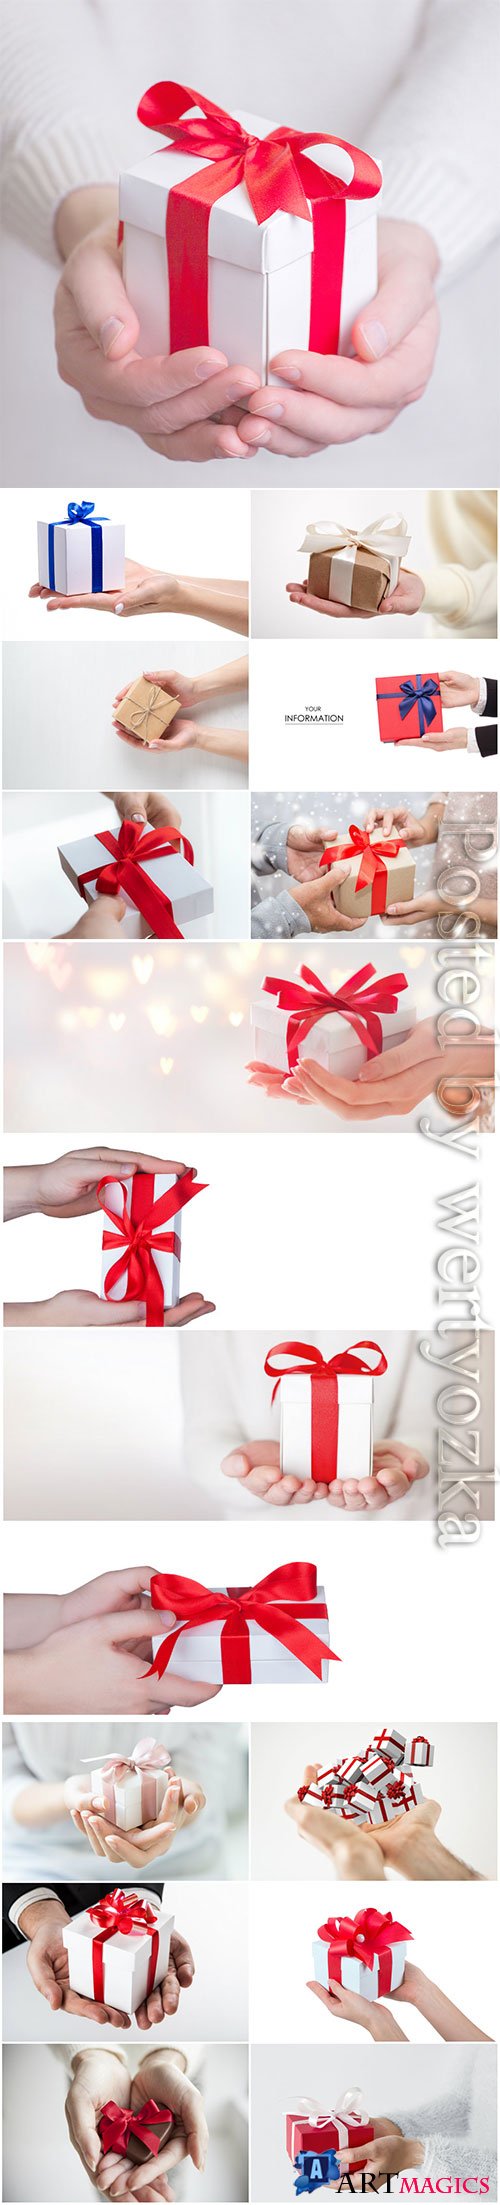 Gift box in the hands, New Year's and Christmas